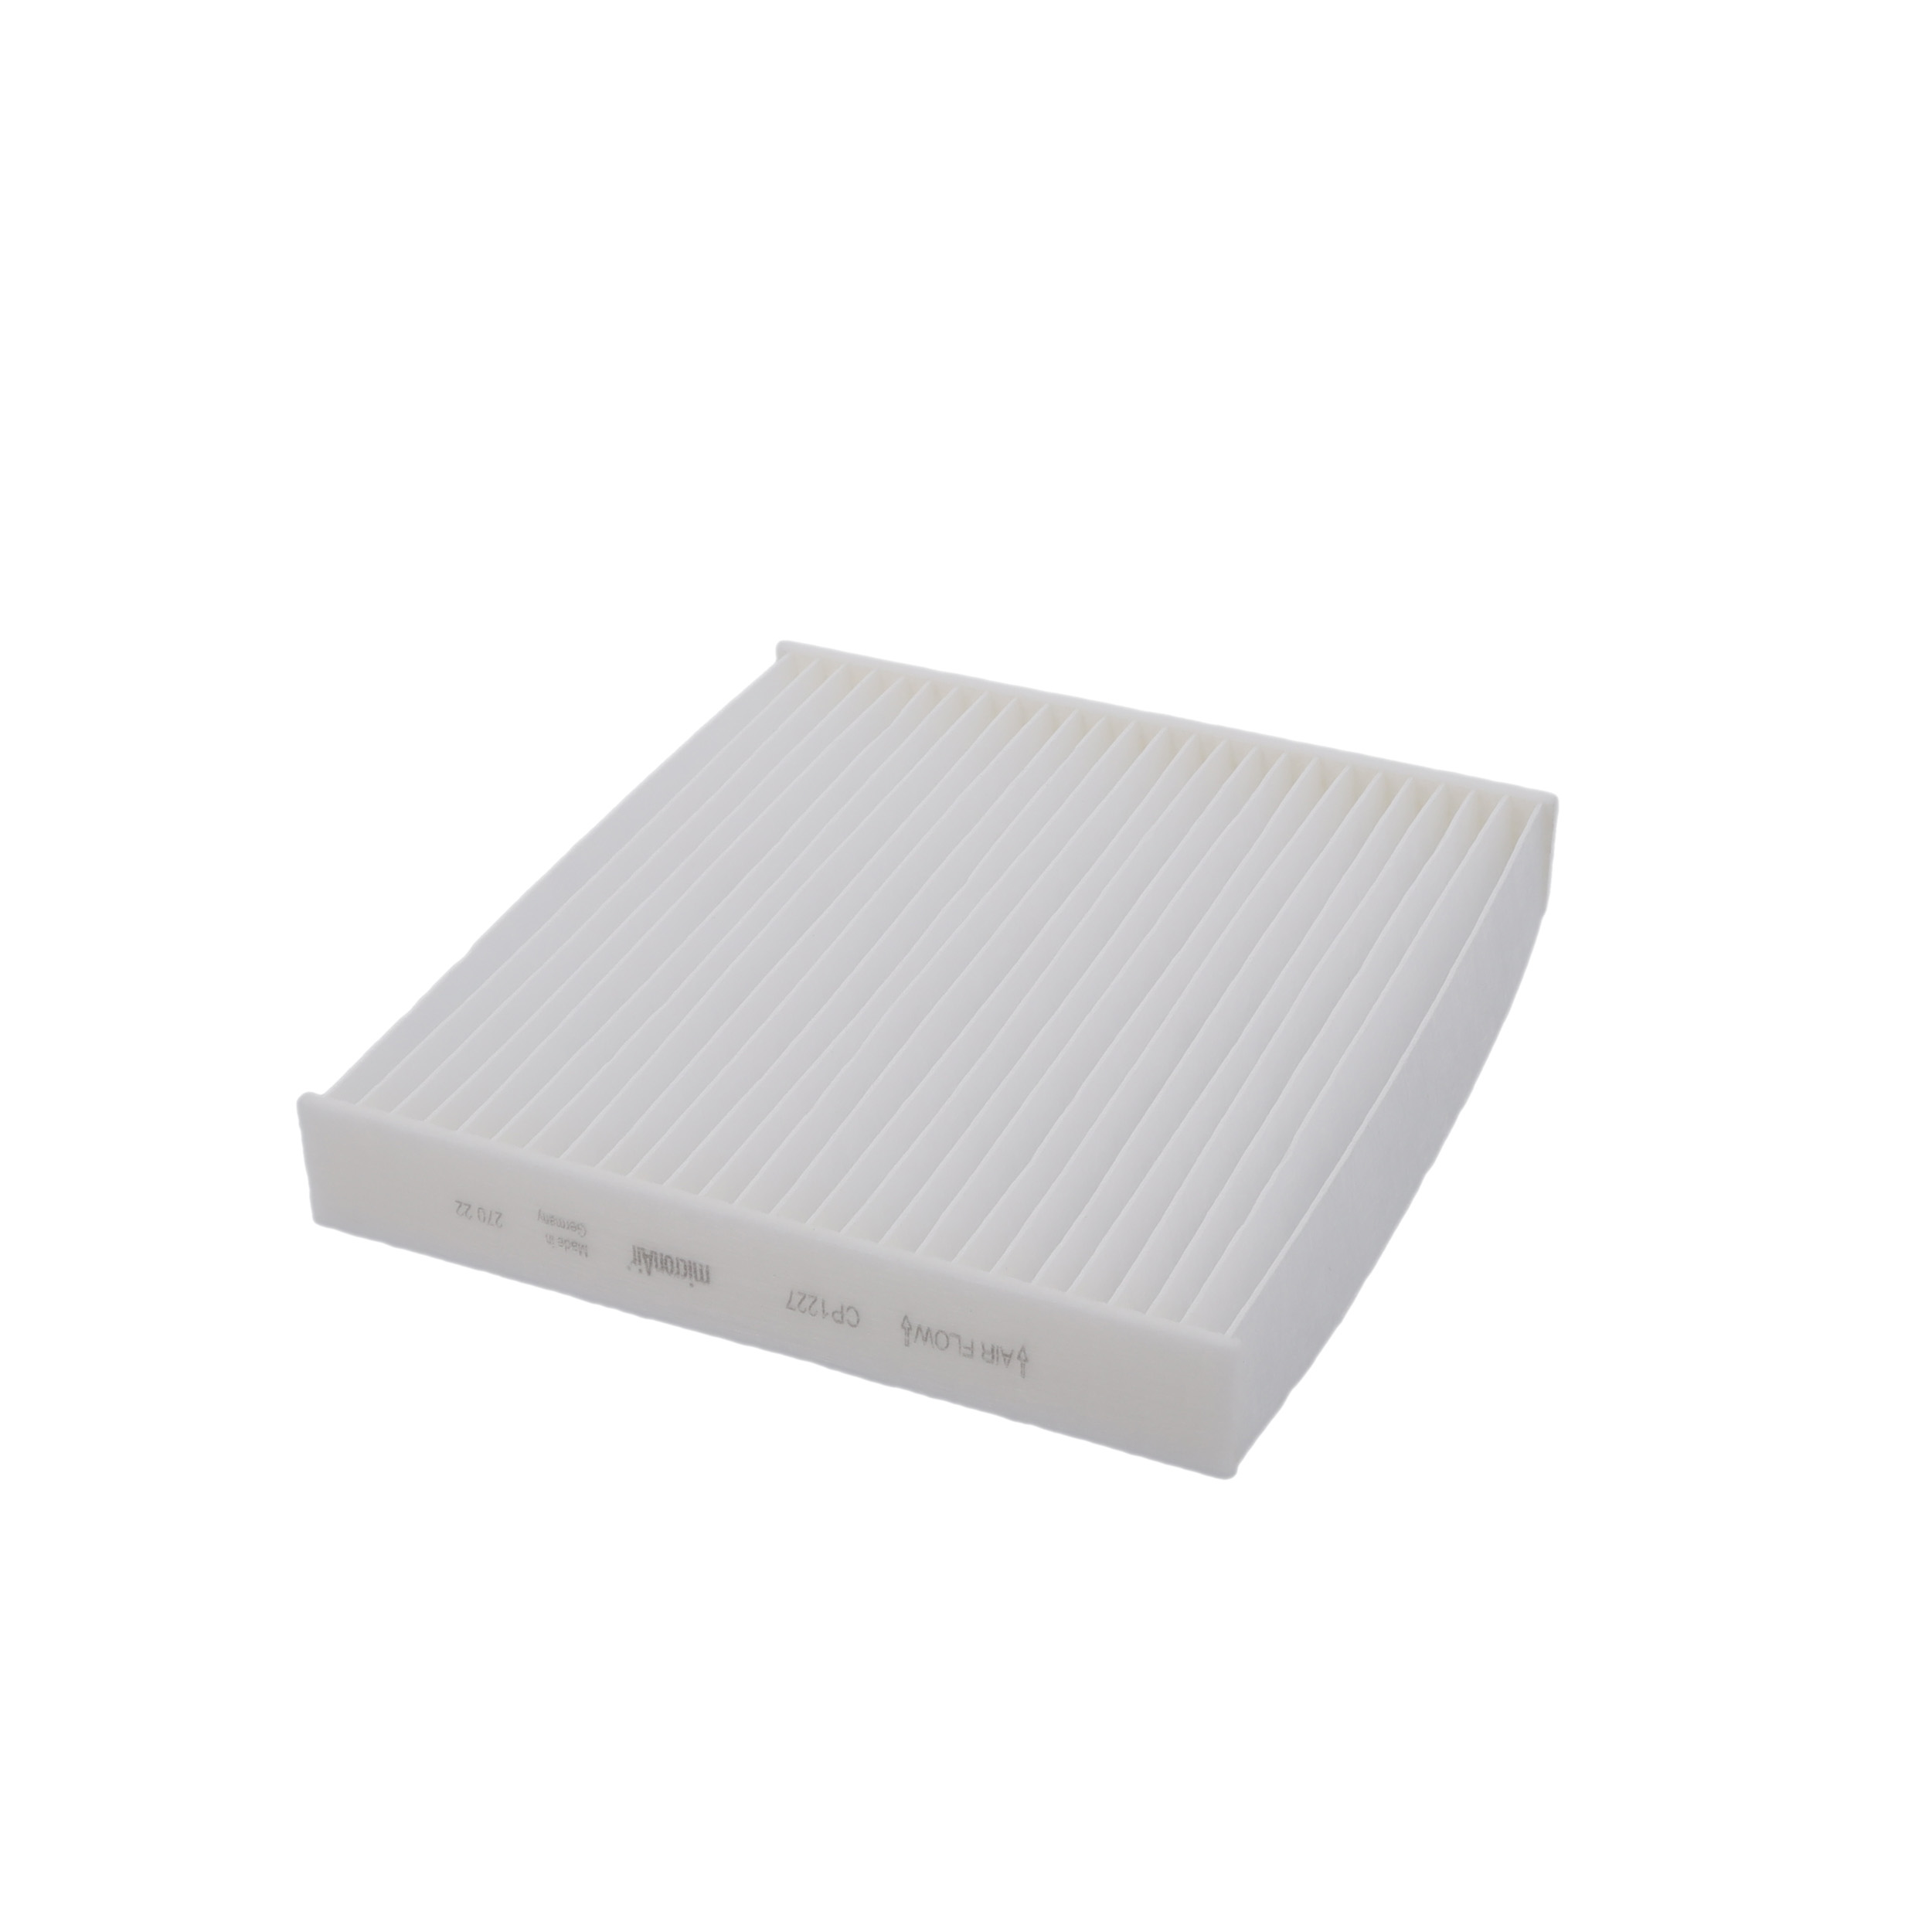 CORTECO Particulate Filter, 209 mm x 194 mm x 30 mm Width: 194mm, Height: 30mm, Length: 209mm Cabin filter 80000604 buy